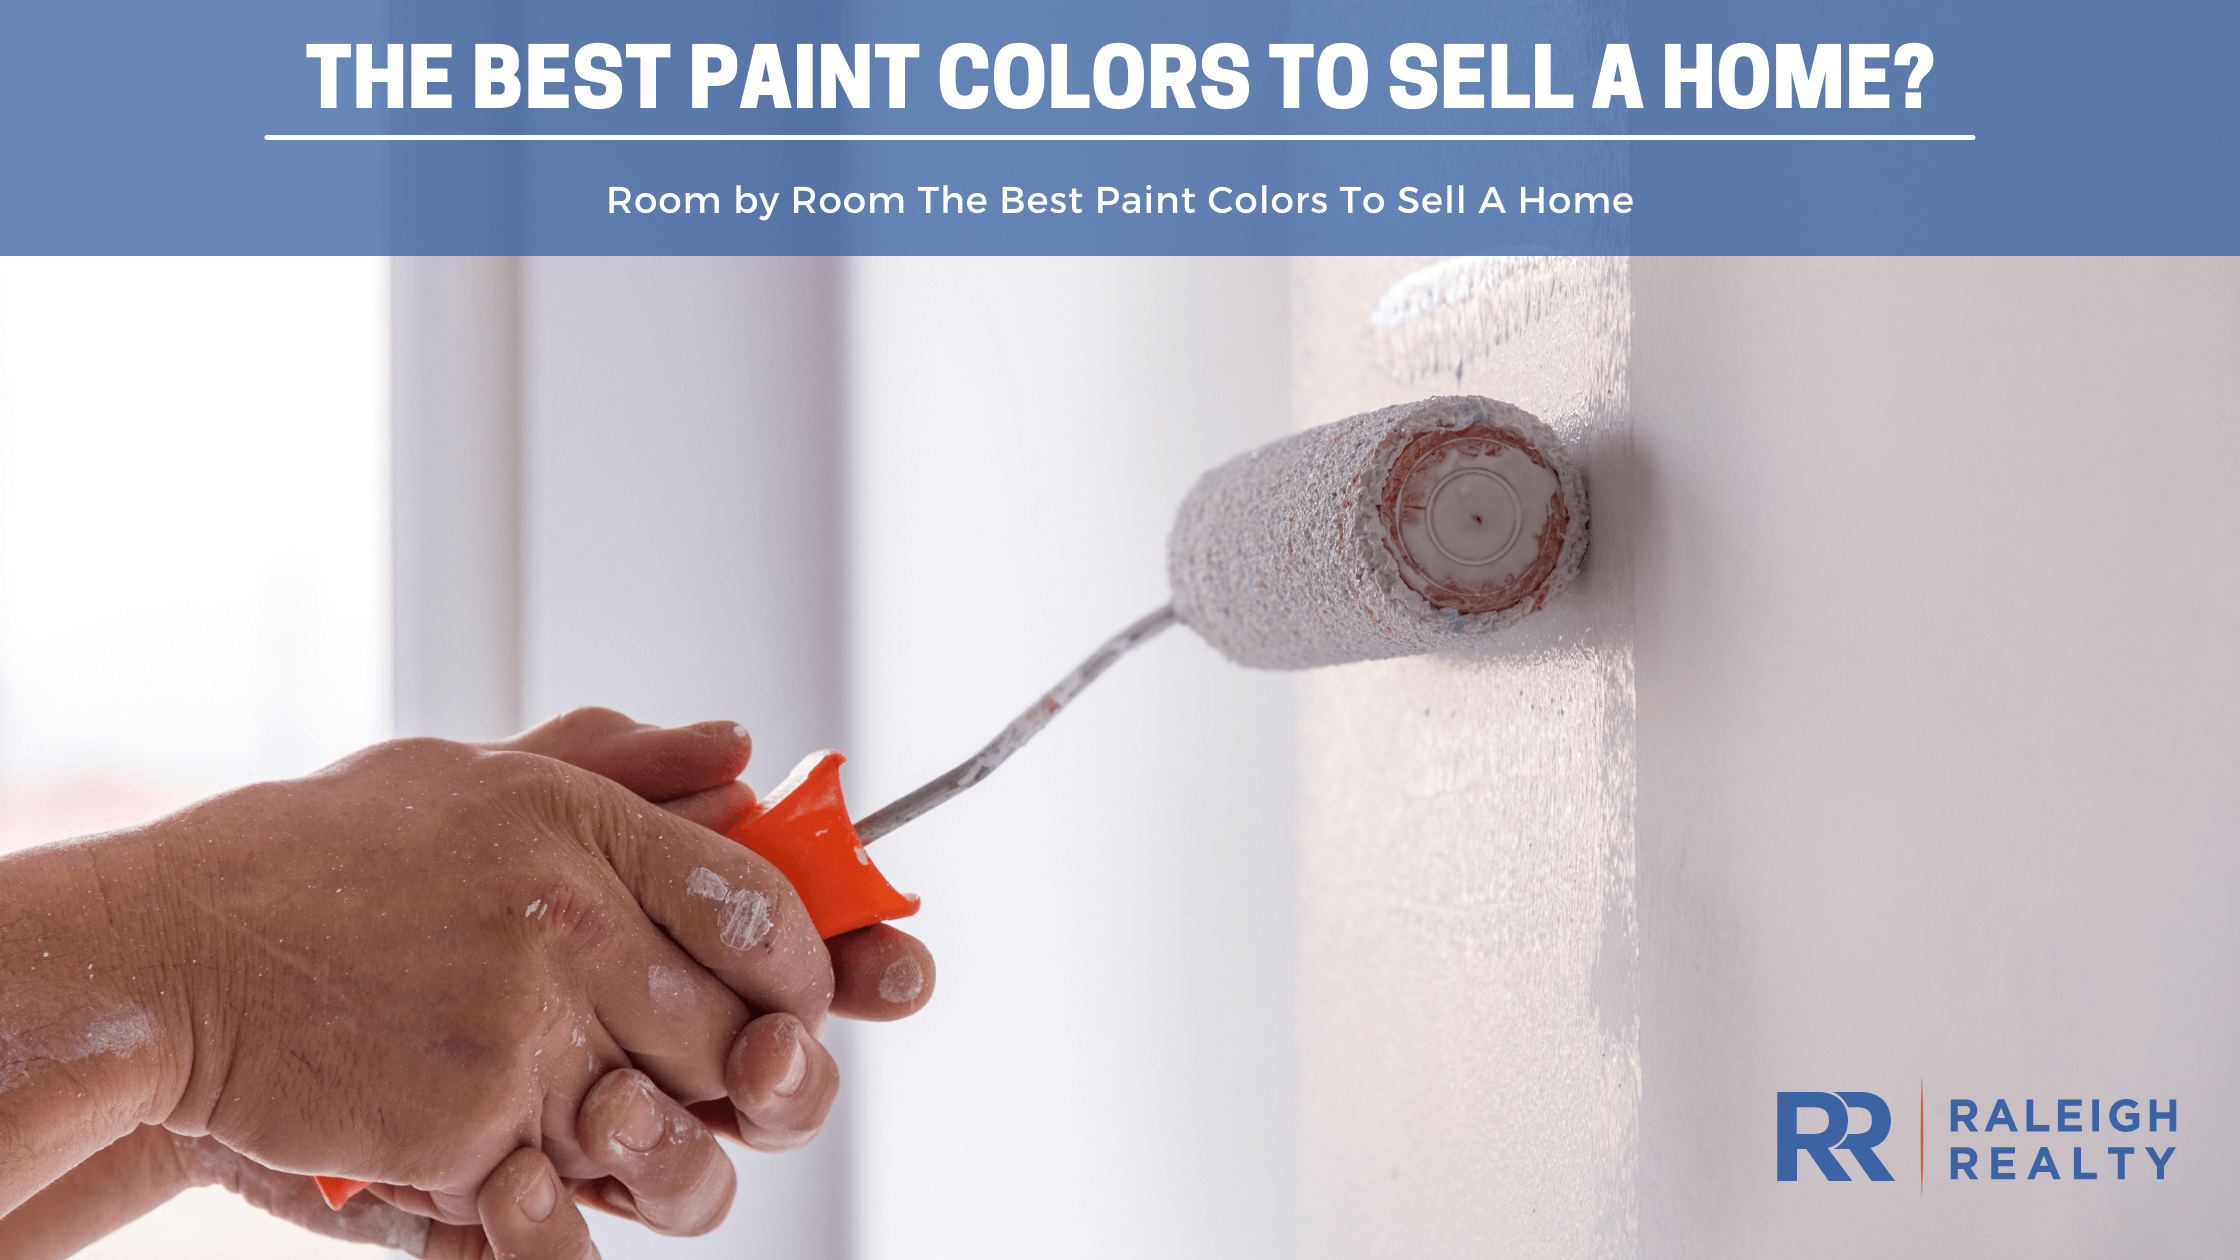 What Are The Best Paint Colors To Sell a Home?